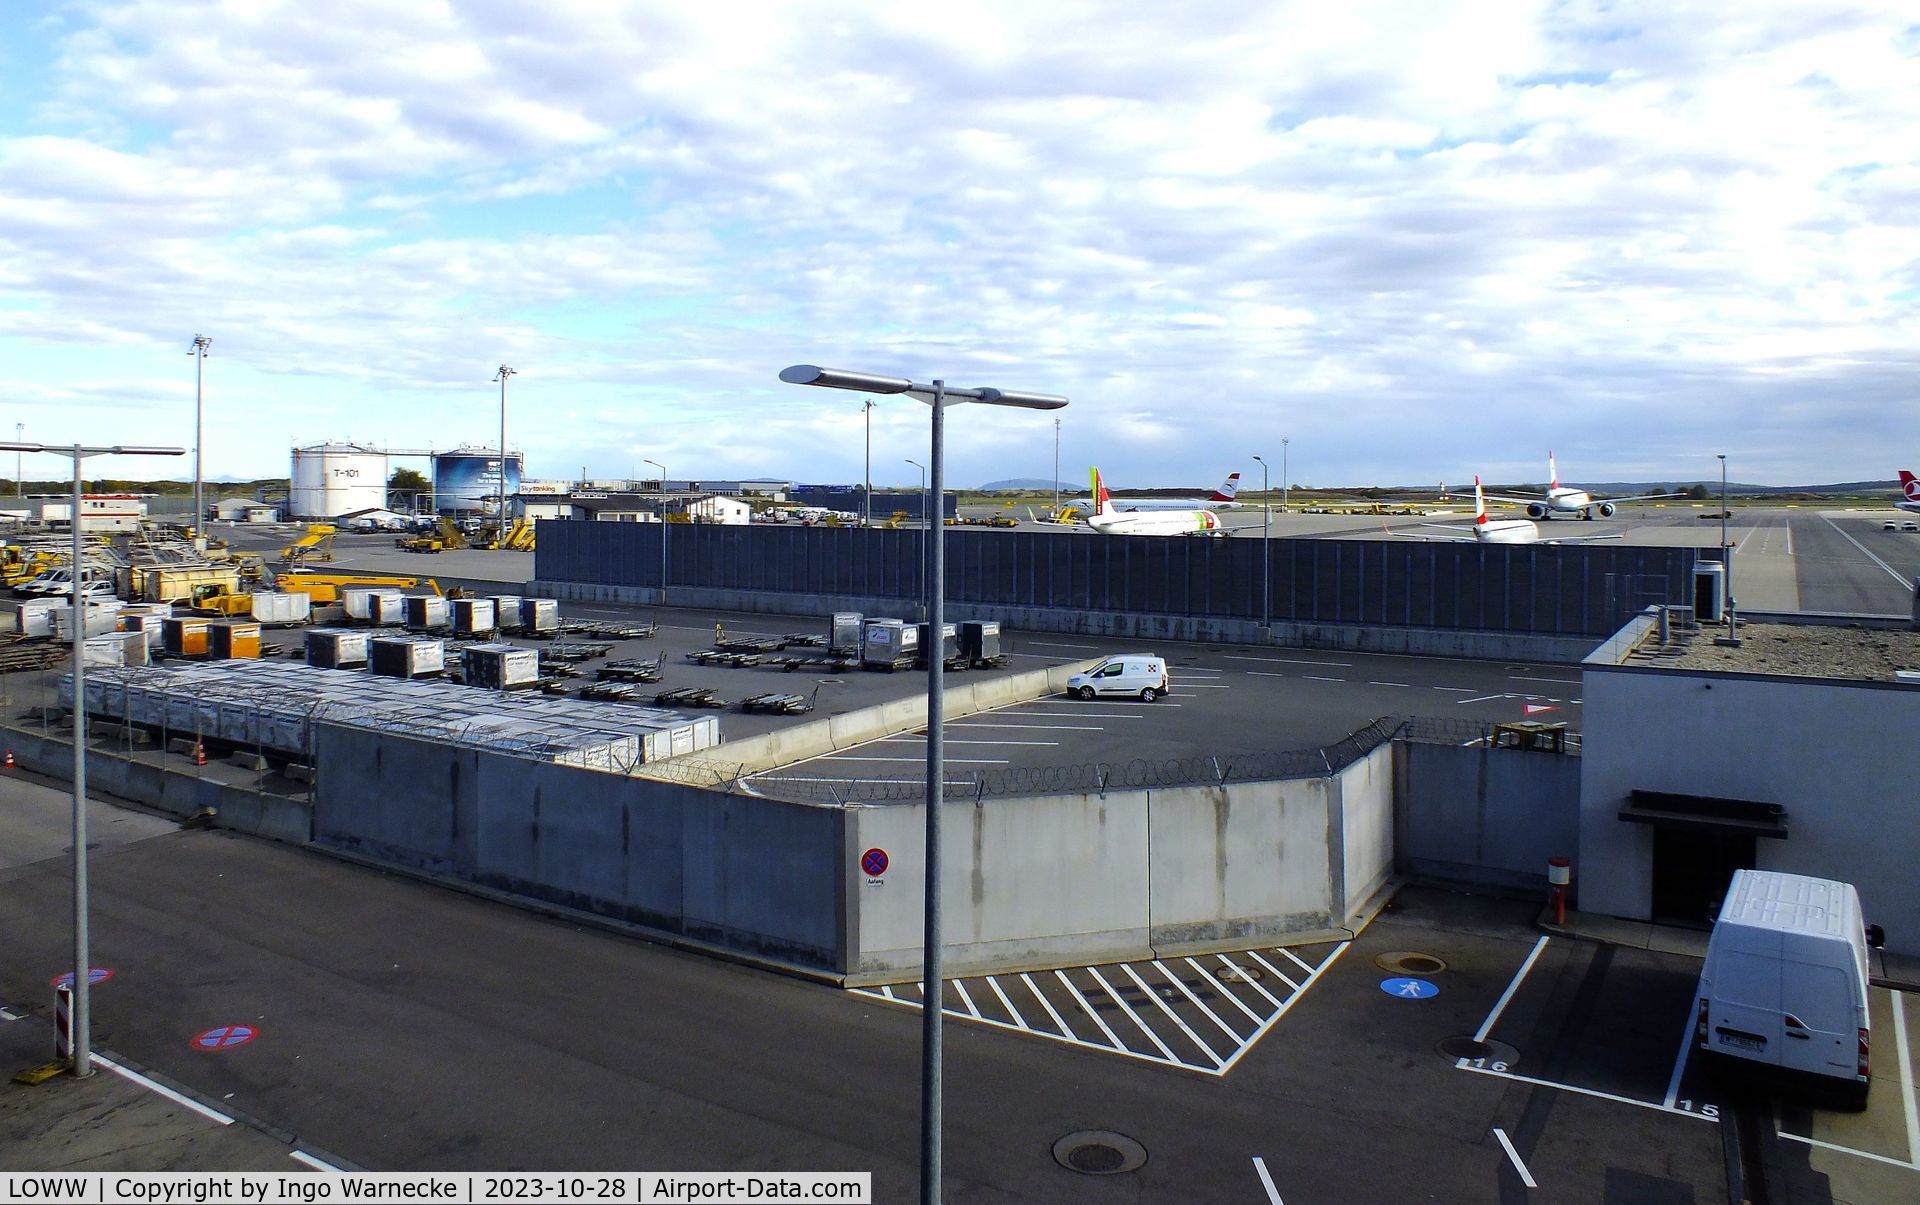 Vienna International Airport, Vienna Austria (LOWW) - apron and technical area north of terminal 3 at Wien airport